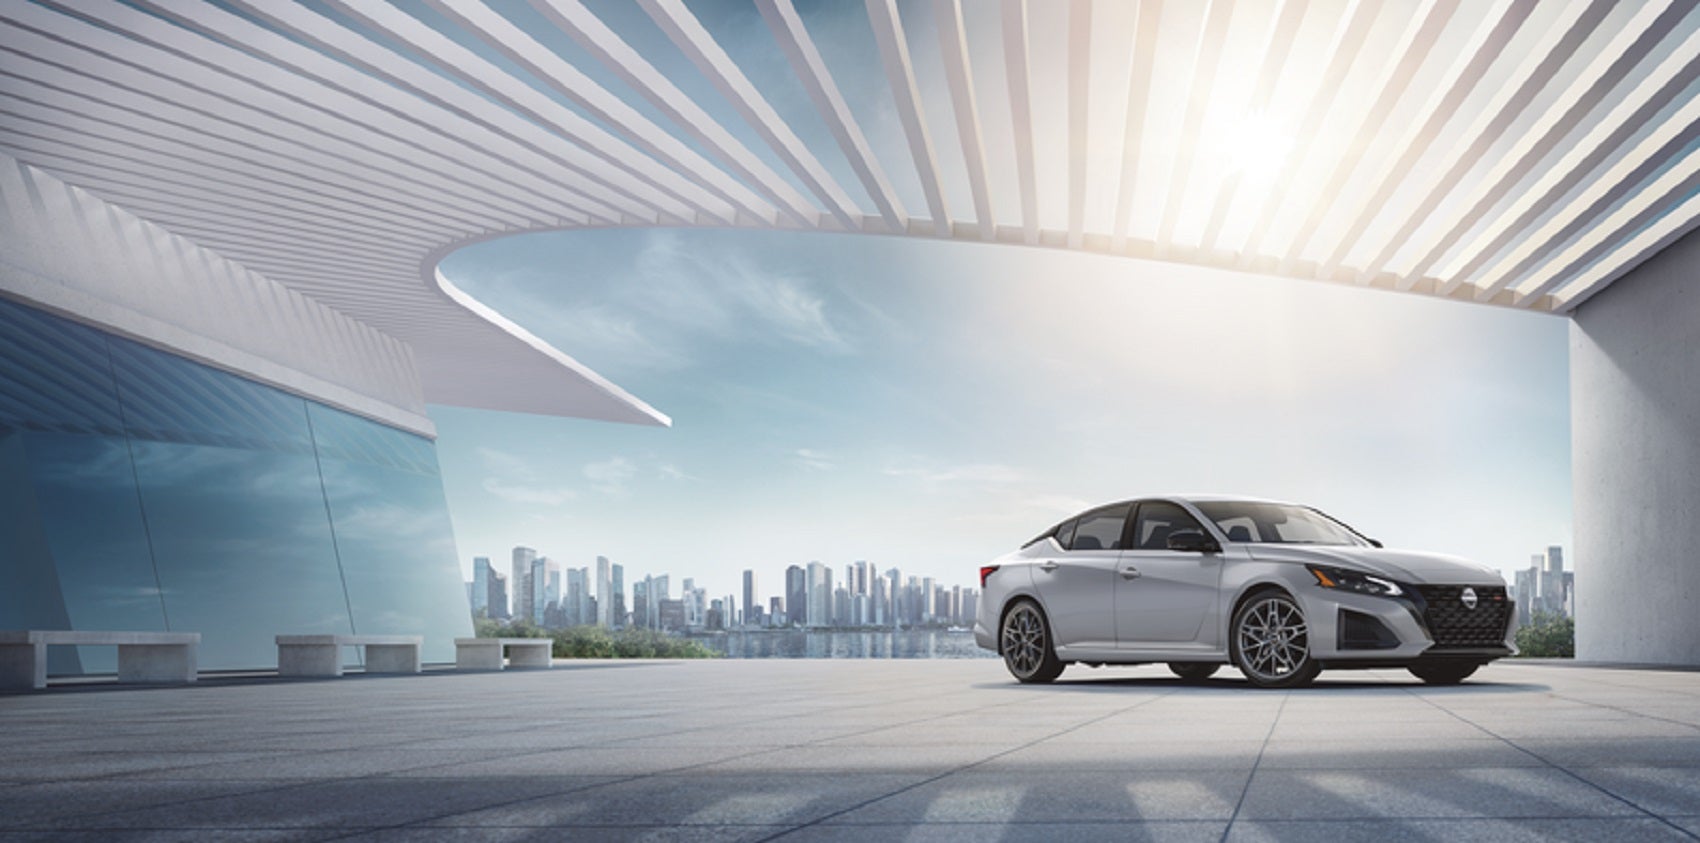 Why Choose the Nissan Altima?